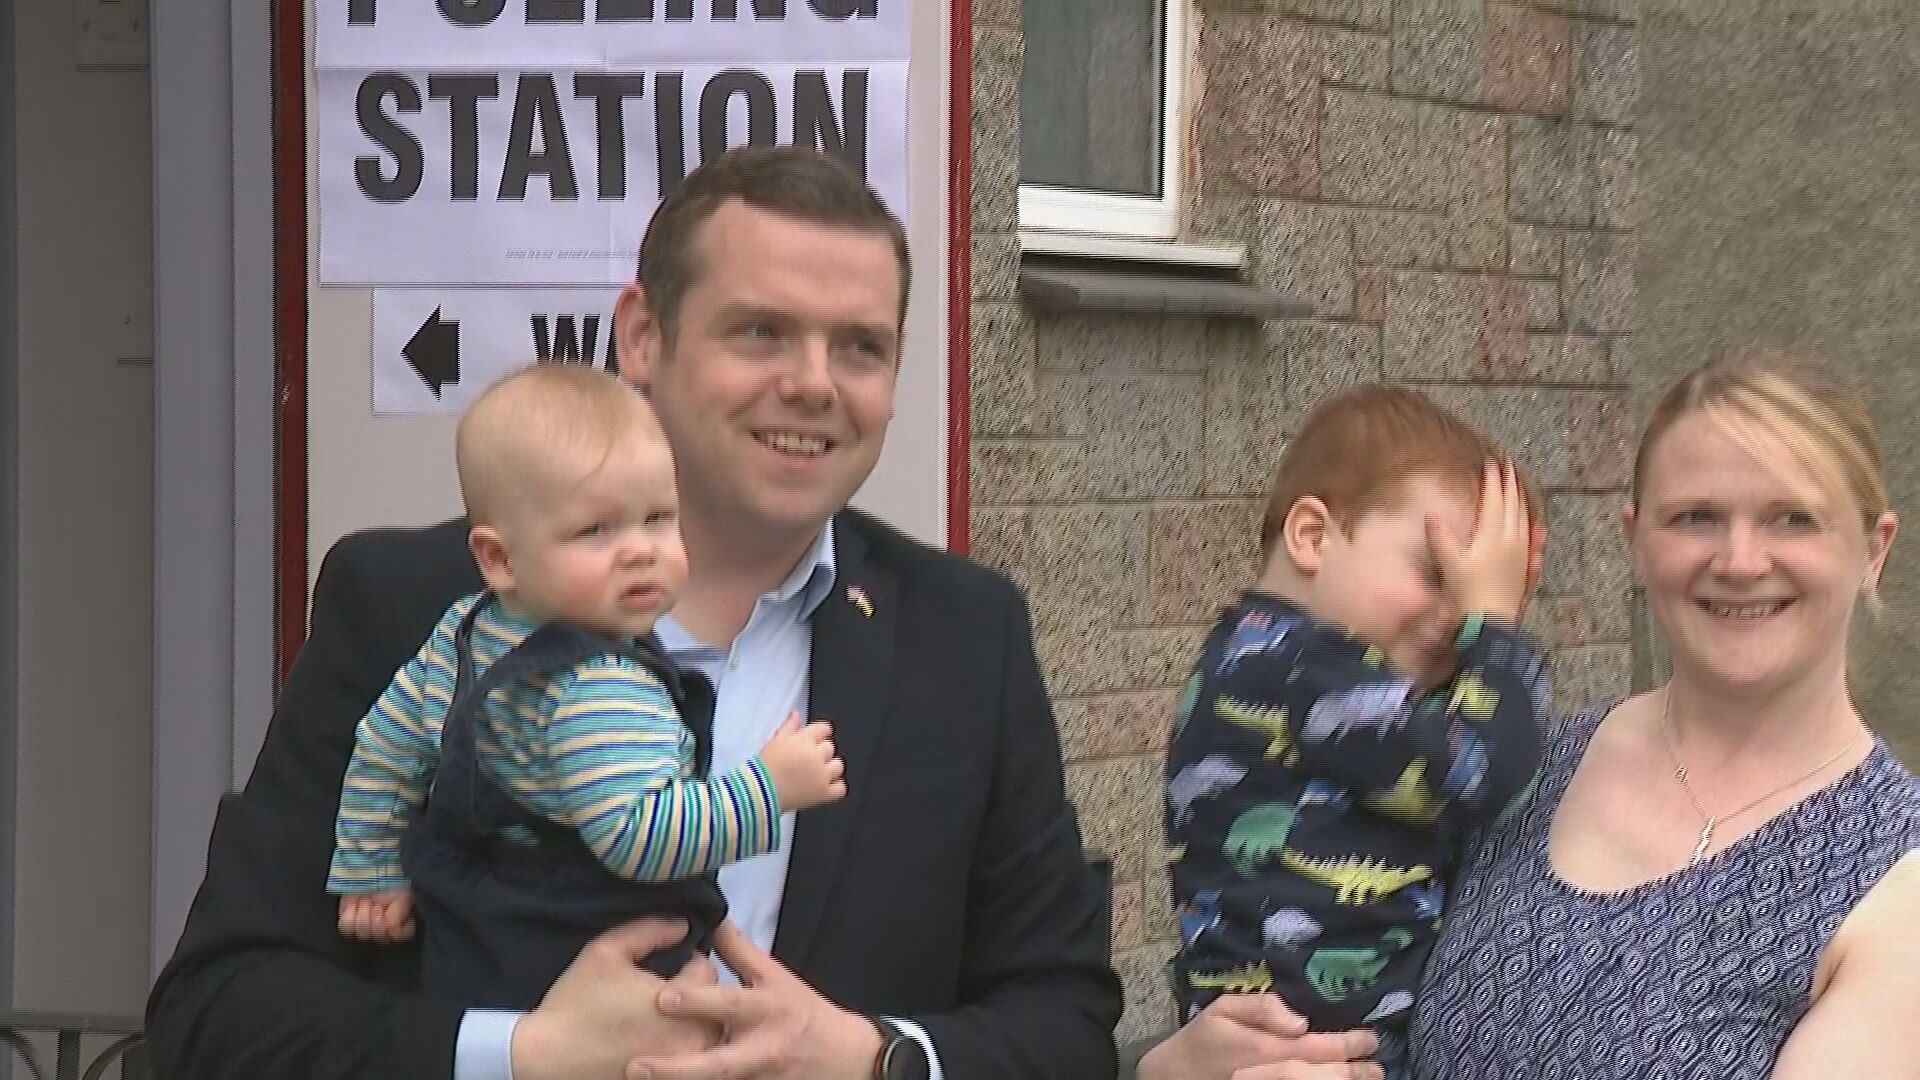 Scottish Conservative leader Douglas Ross and family at voting station in Moray.